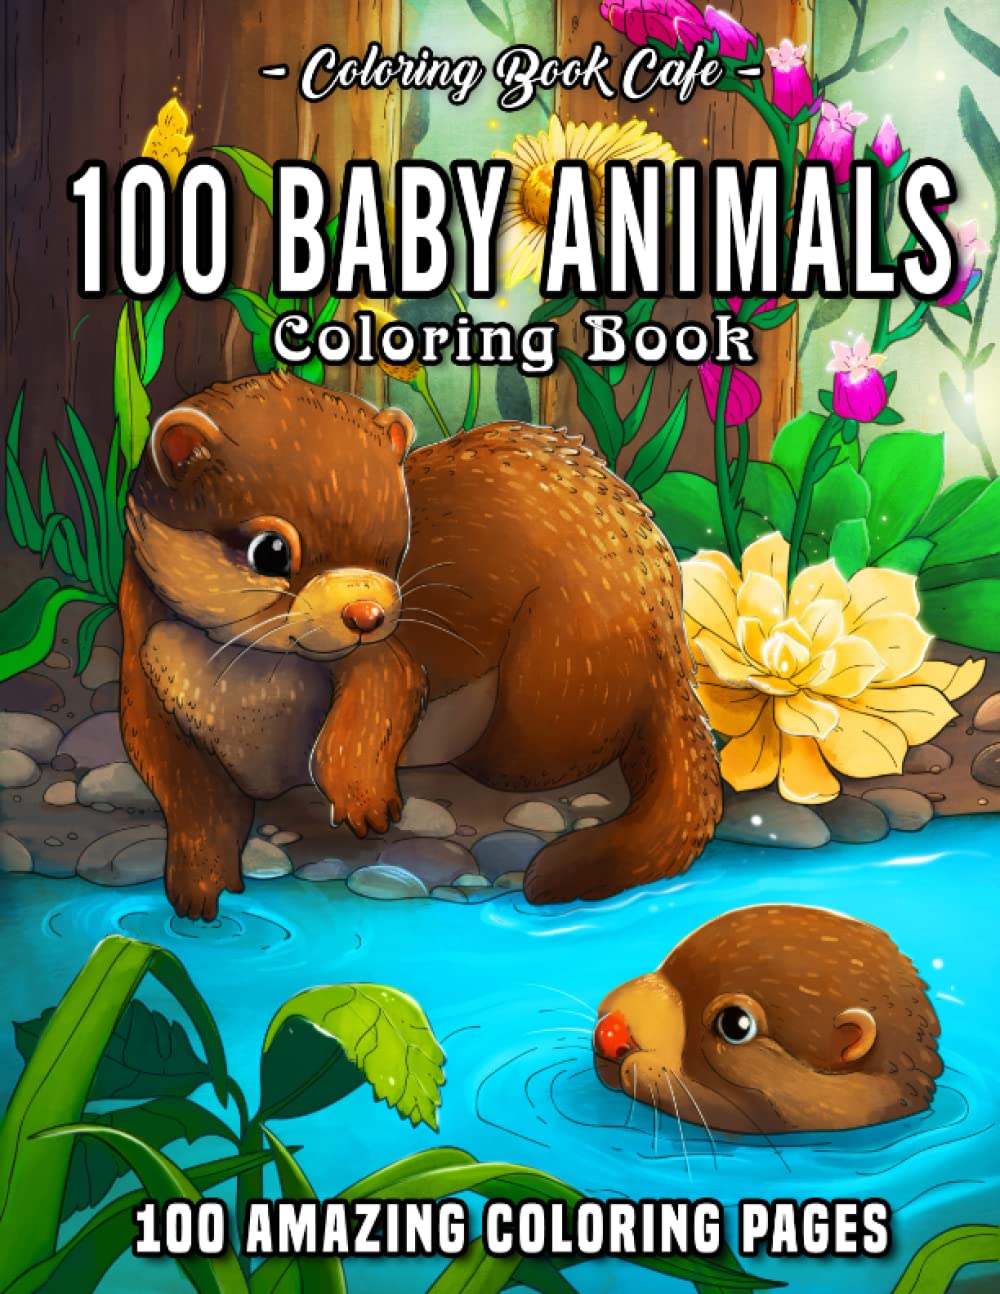 Mua 100 Baby Animals: A Coloring Book Featuring 100 Incredibly Cute and  Lovable Baby Animals from Forests, Jungles, Oceans and Farms for Hours of  Coloring Fun (Baby Animal Coloring Books) trên Amazon